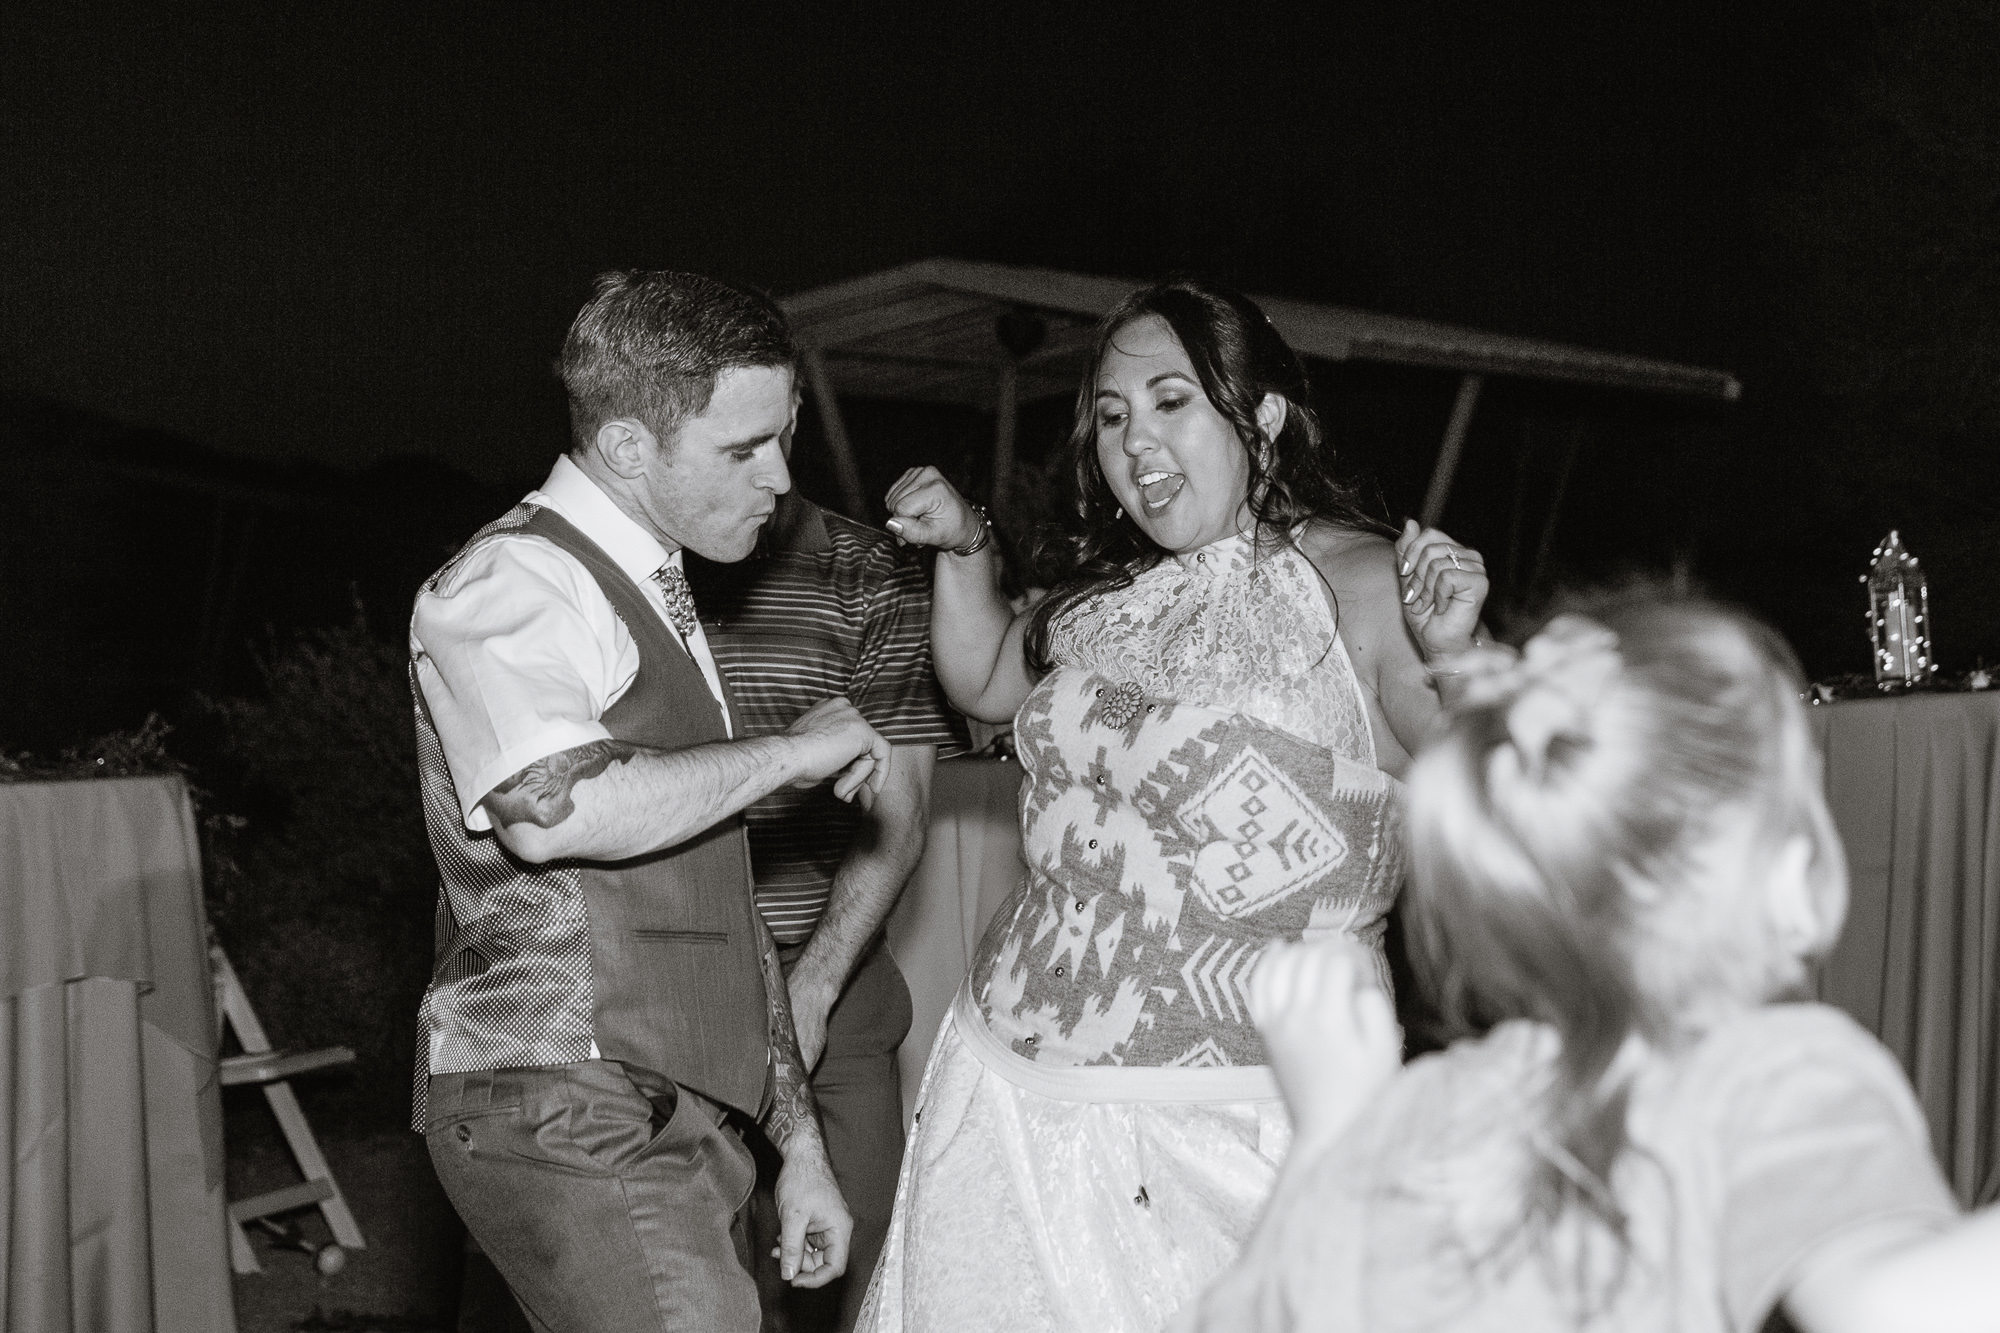 Bride and groom dancing with guests at their wedding reception by Arizona wedding photographer PMA Photography.